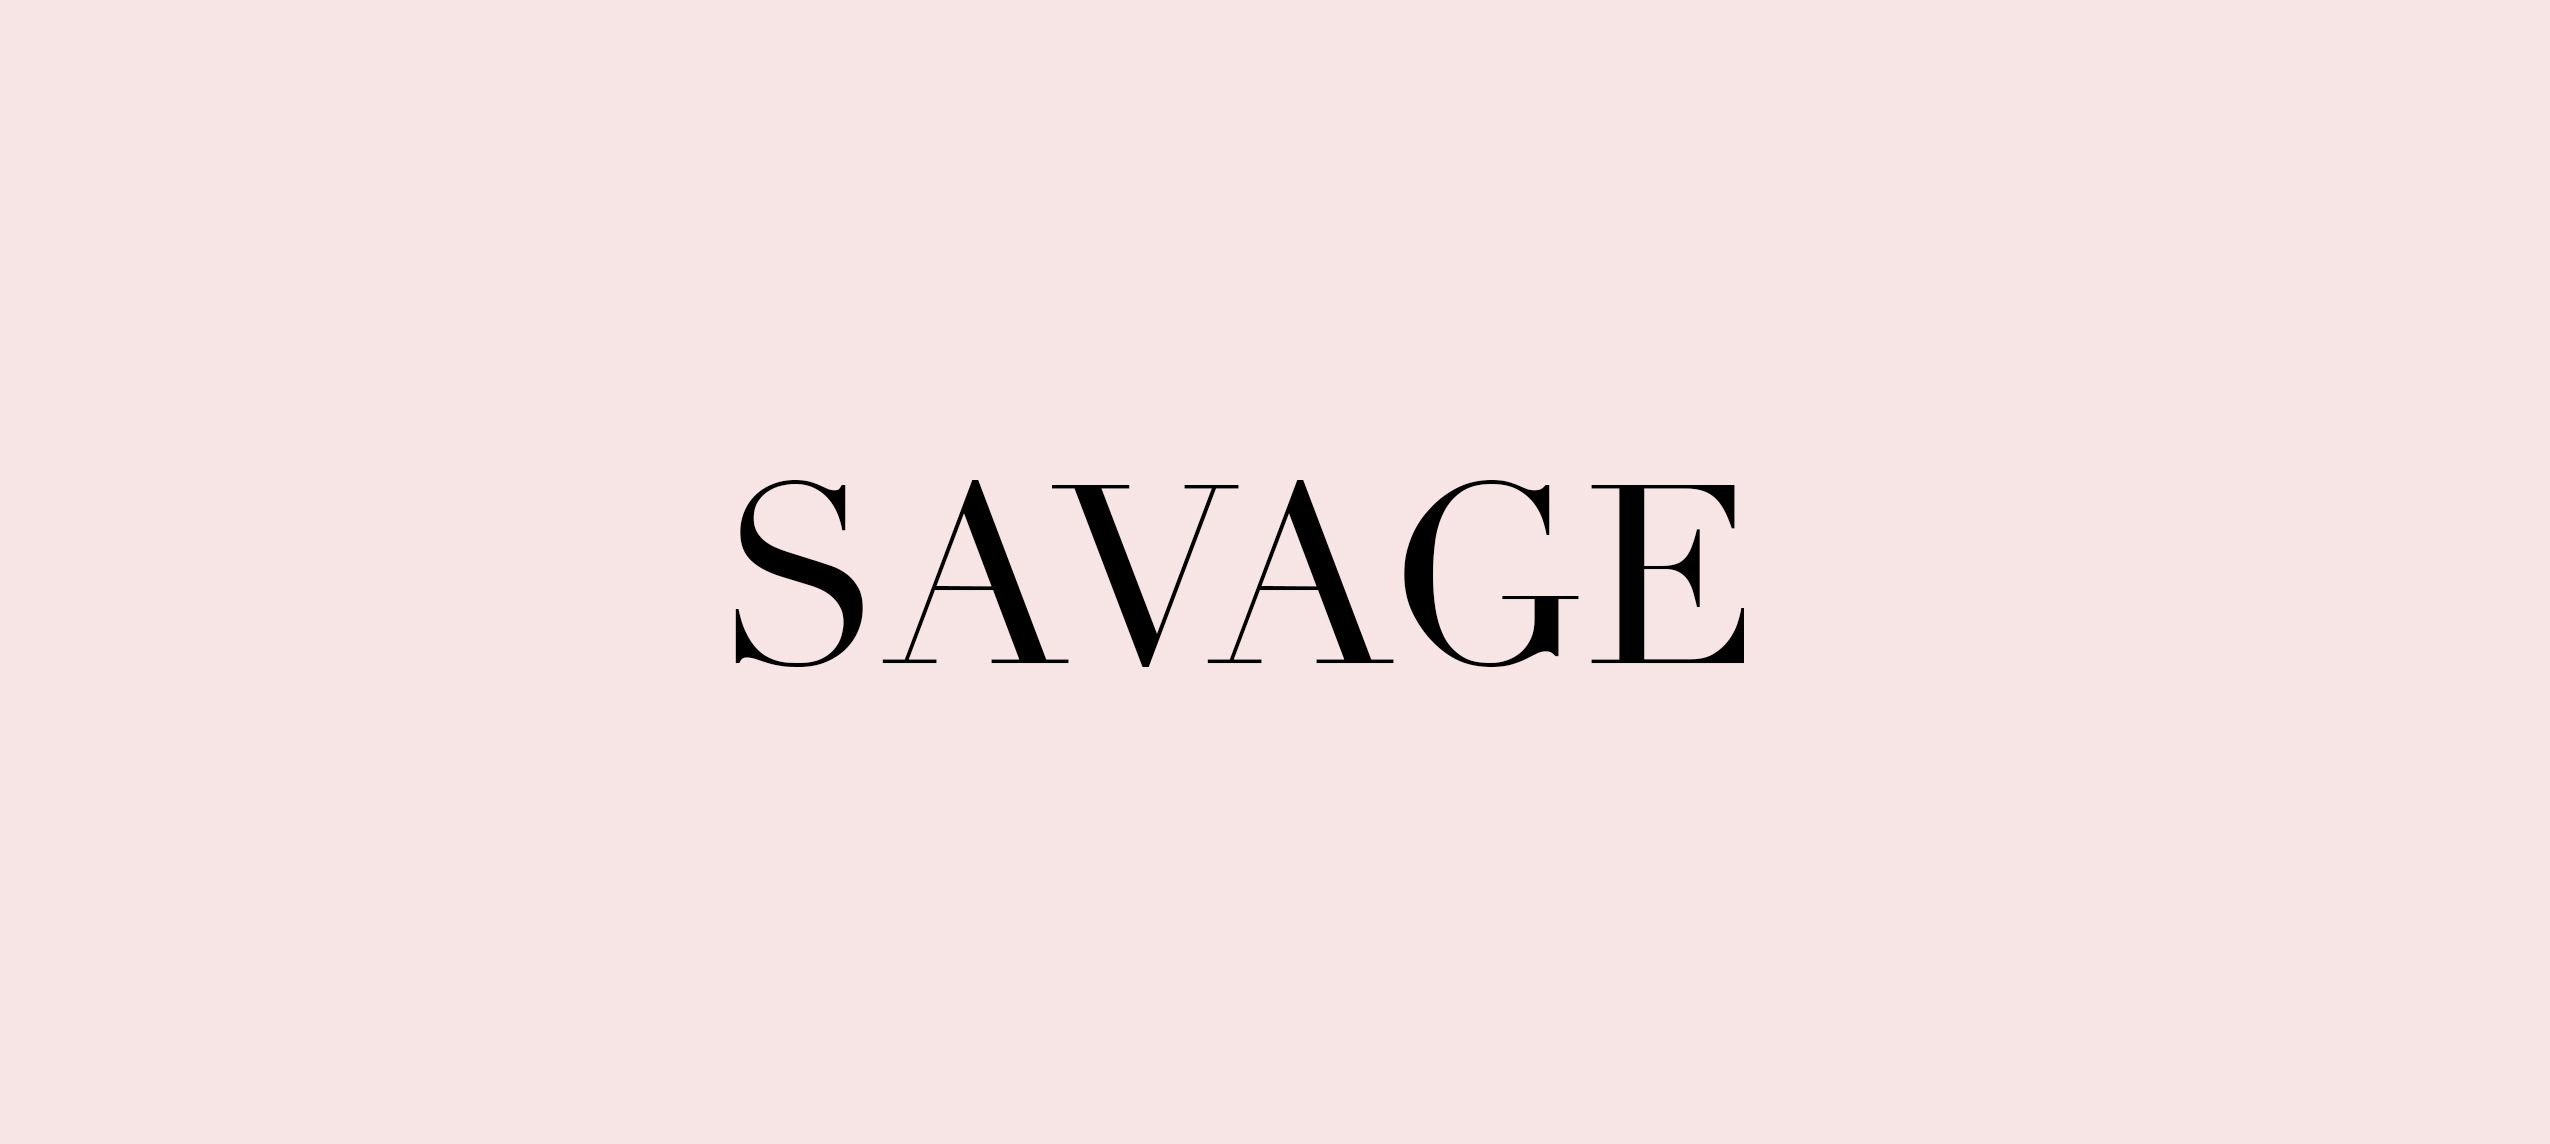 Savage Quotes Wallpaper Free Savage Quotes Background